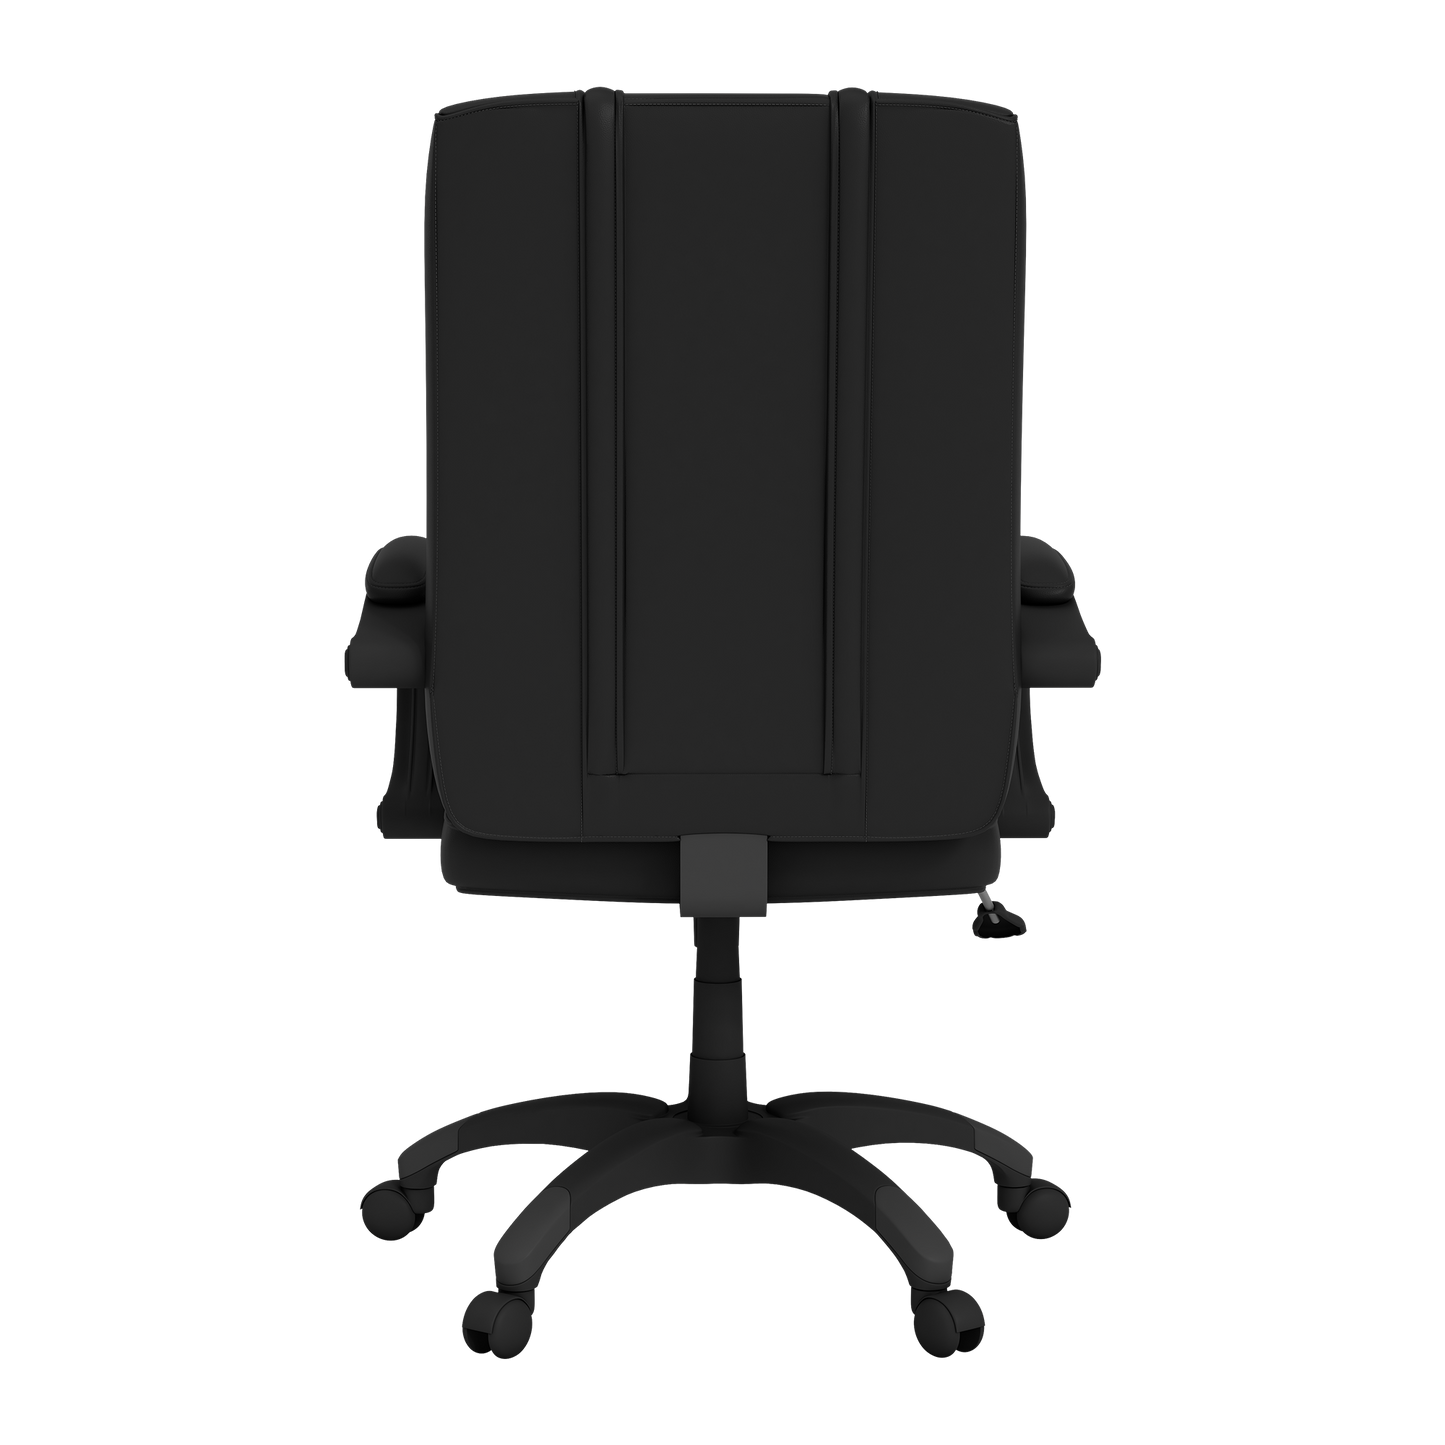 Office Chair 1000 with Vegas Dawgs Logo